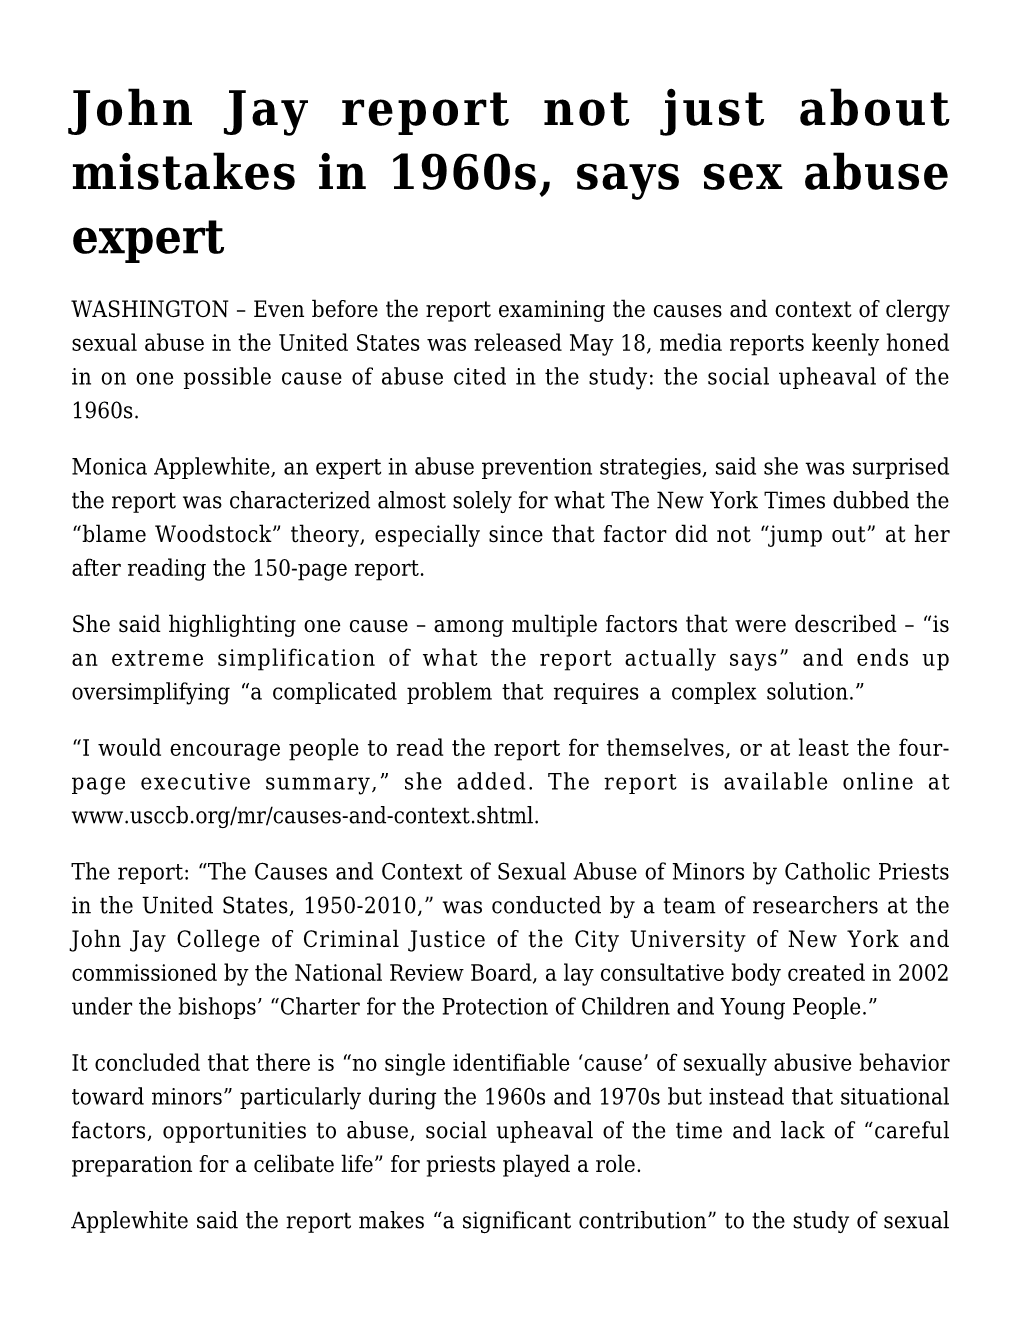 John Jay Report Not Just About Mistakes in 1960S, Says Sex Abuse Expert